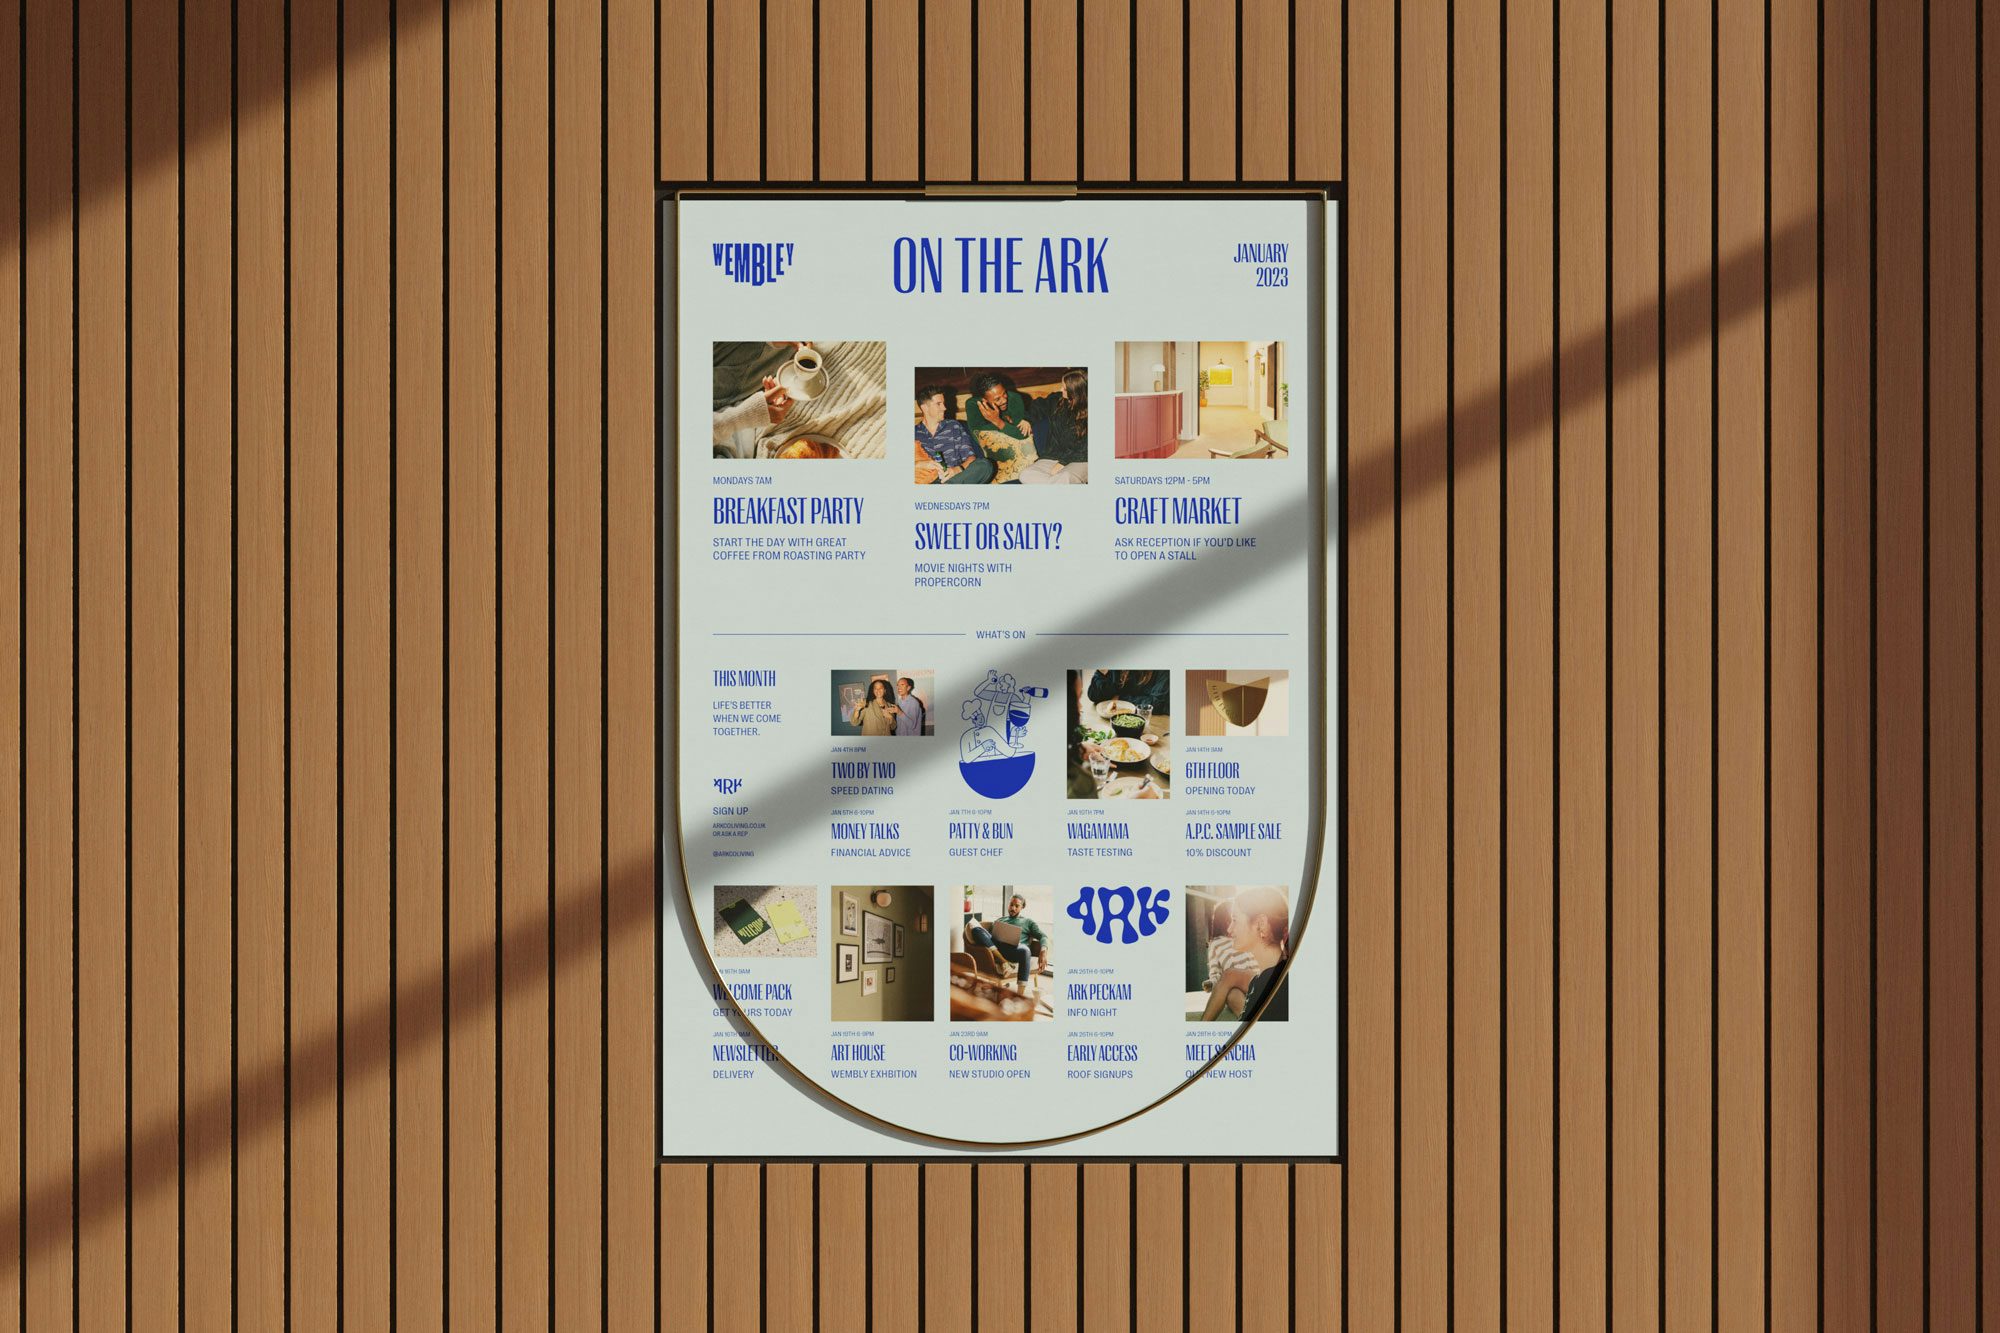 Image shows Ark branding on a poster headlined 'On the ark' in bright blue capital letters, with events listings underneath